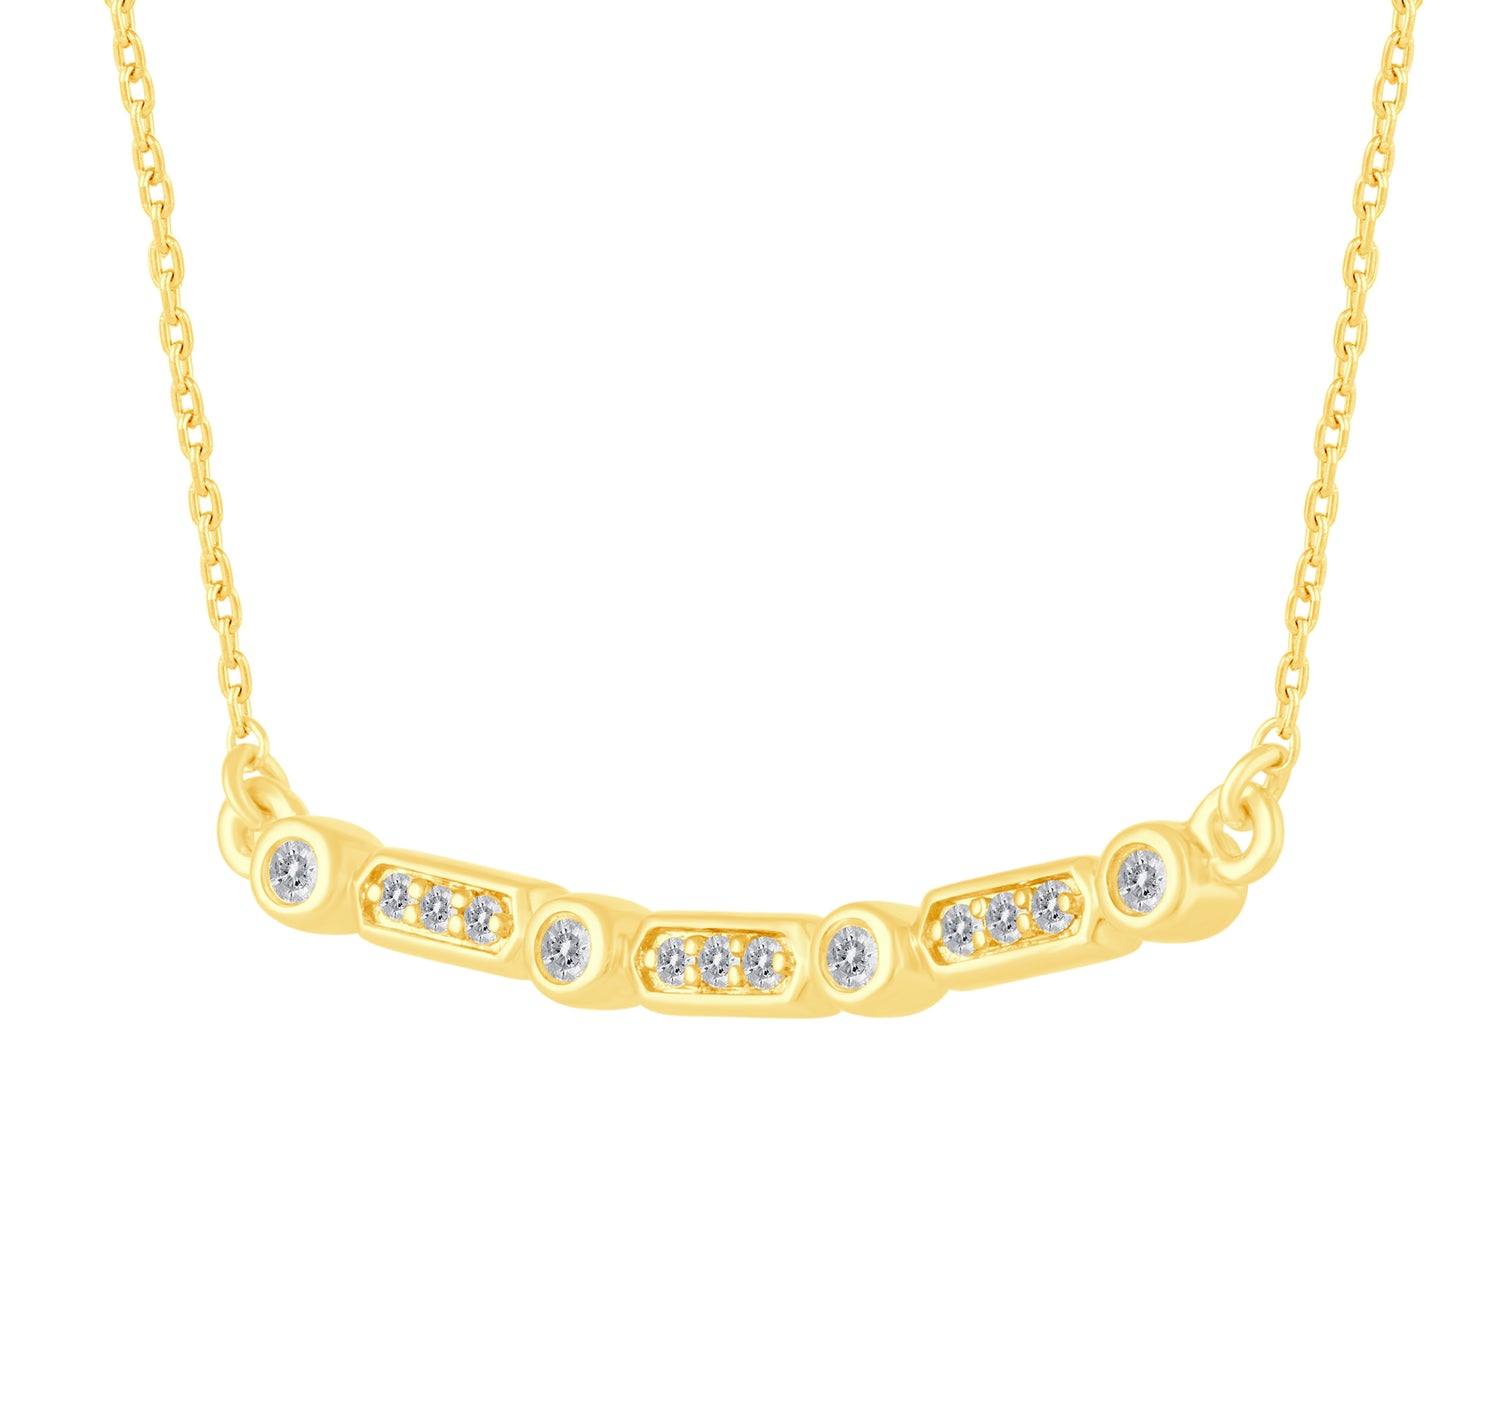 1/10 Cttw Diamond Mosaic Bar Pendant Necklace set in 925 Sterling Silver Yellow Gold Plating